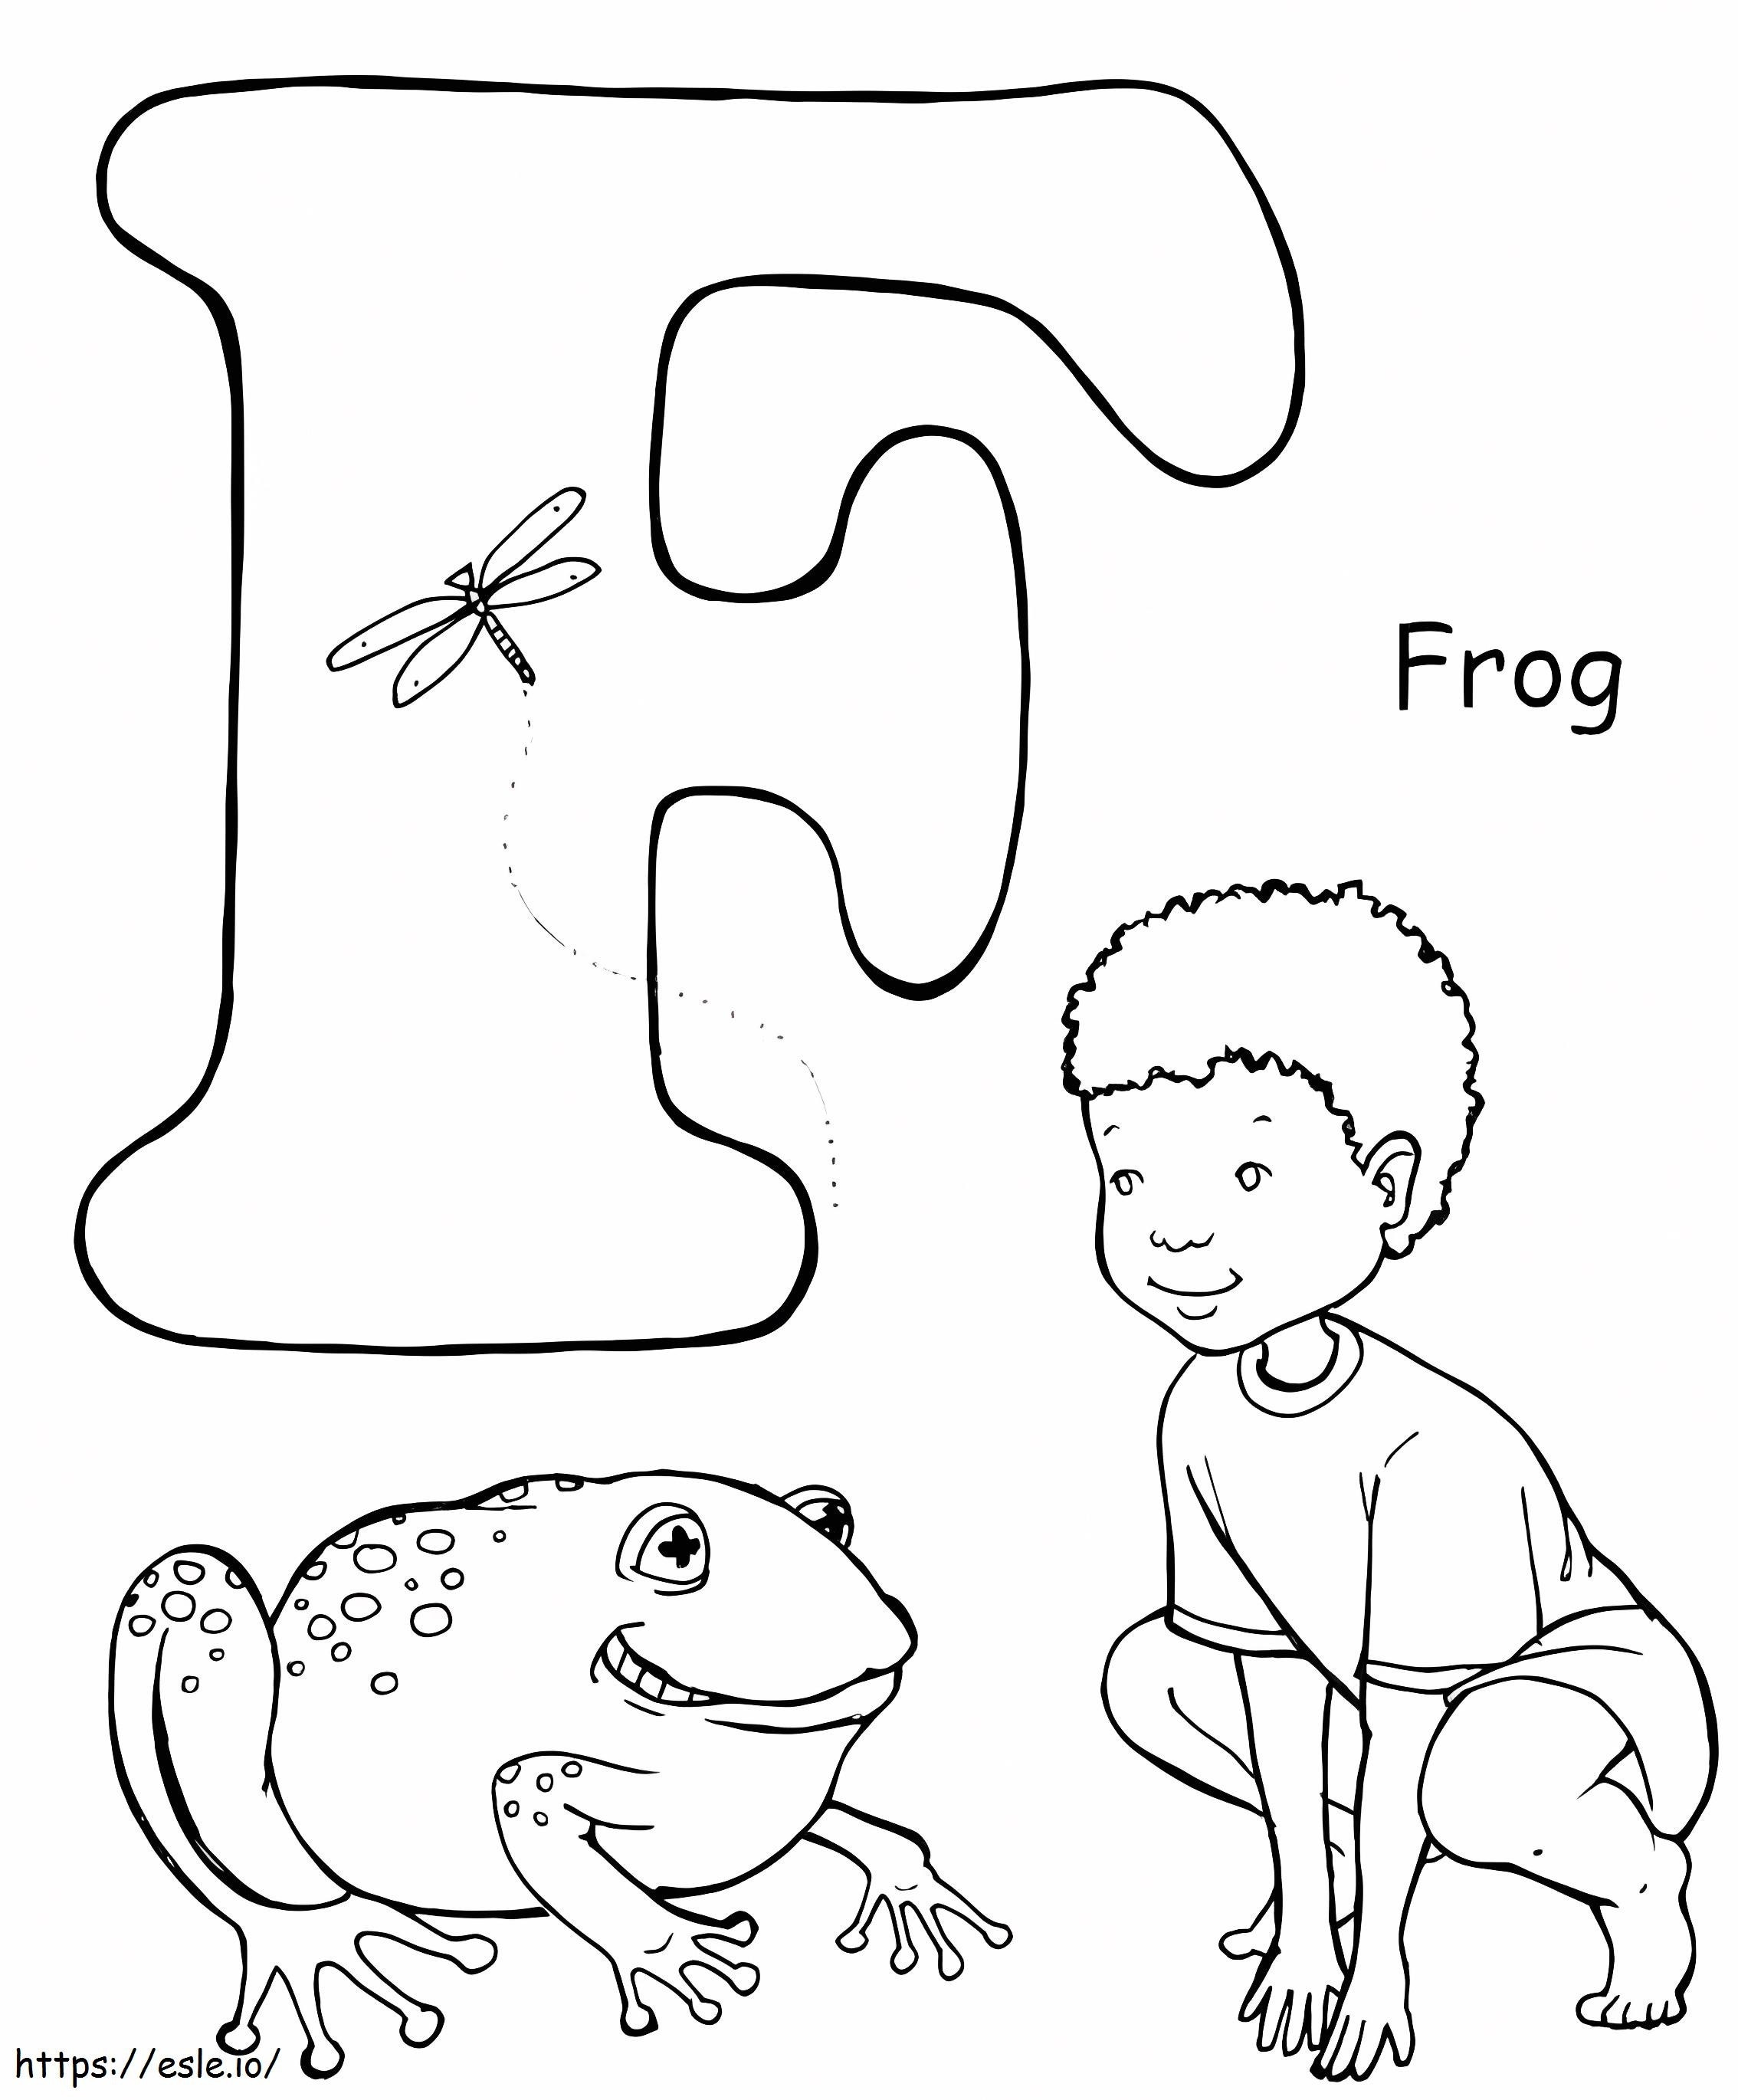 Yoga Frog Pose coloring page